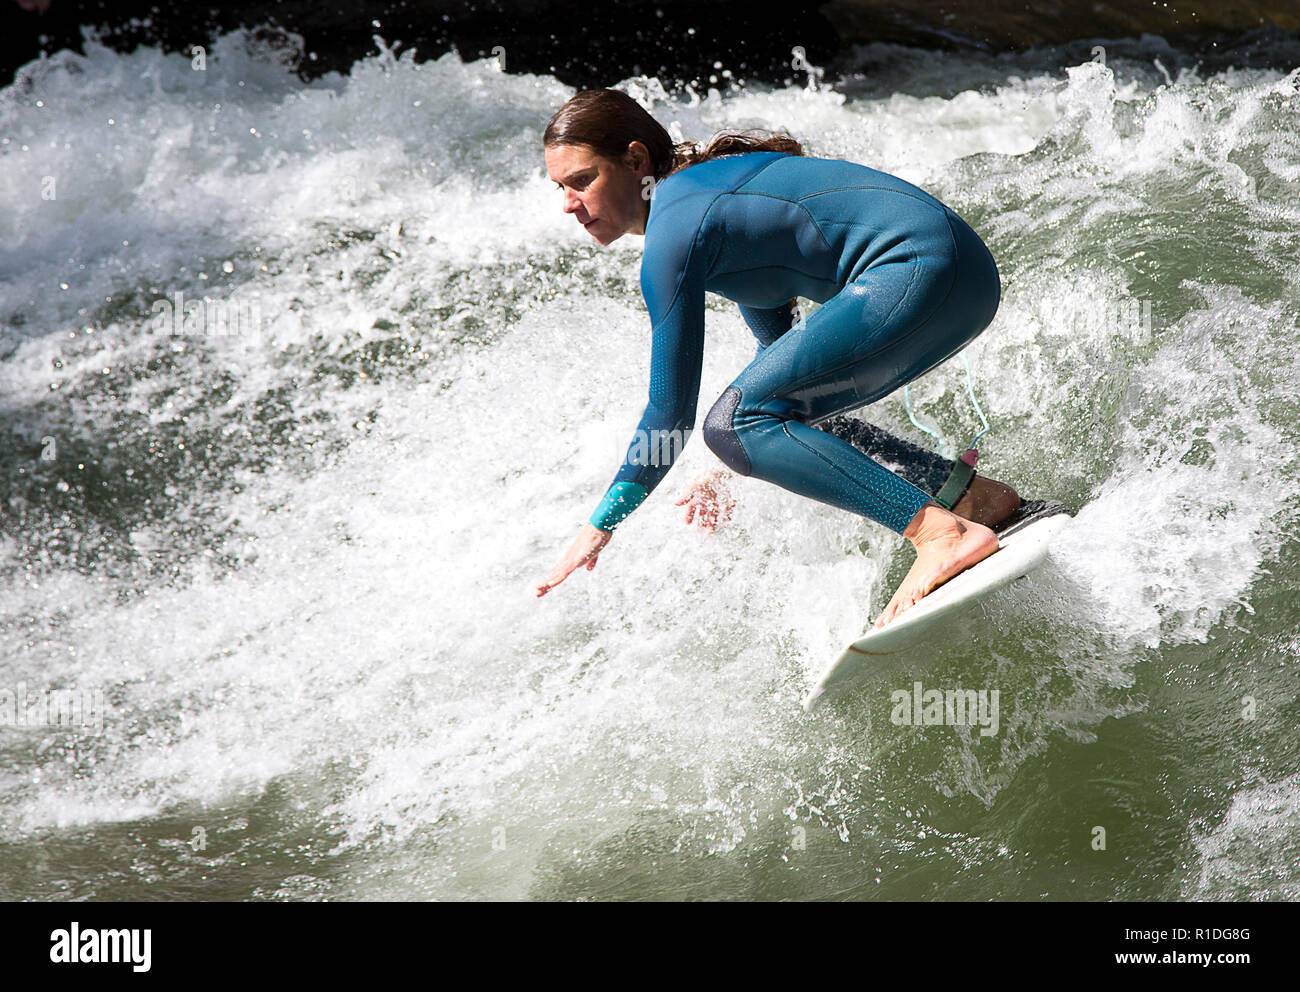 Munich, Bavaria, Germany. 13th Oct, 2018. September 20, 2018. A surfer performs a 360 as she rides the wave on the Eisbach, which is a manmade side arm of the Isar River and flows thru the Englischer Garten in the city center of Munich. A standing wave has been created that allows landlocked Germans to ride waves just like in the ocean but it is in the heart of Munich, Germany. Credit: Ralph Lauer/ZUMA Wire/Alamy Live News Stock Photo